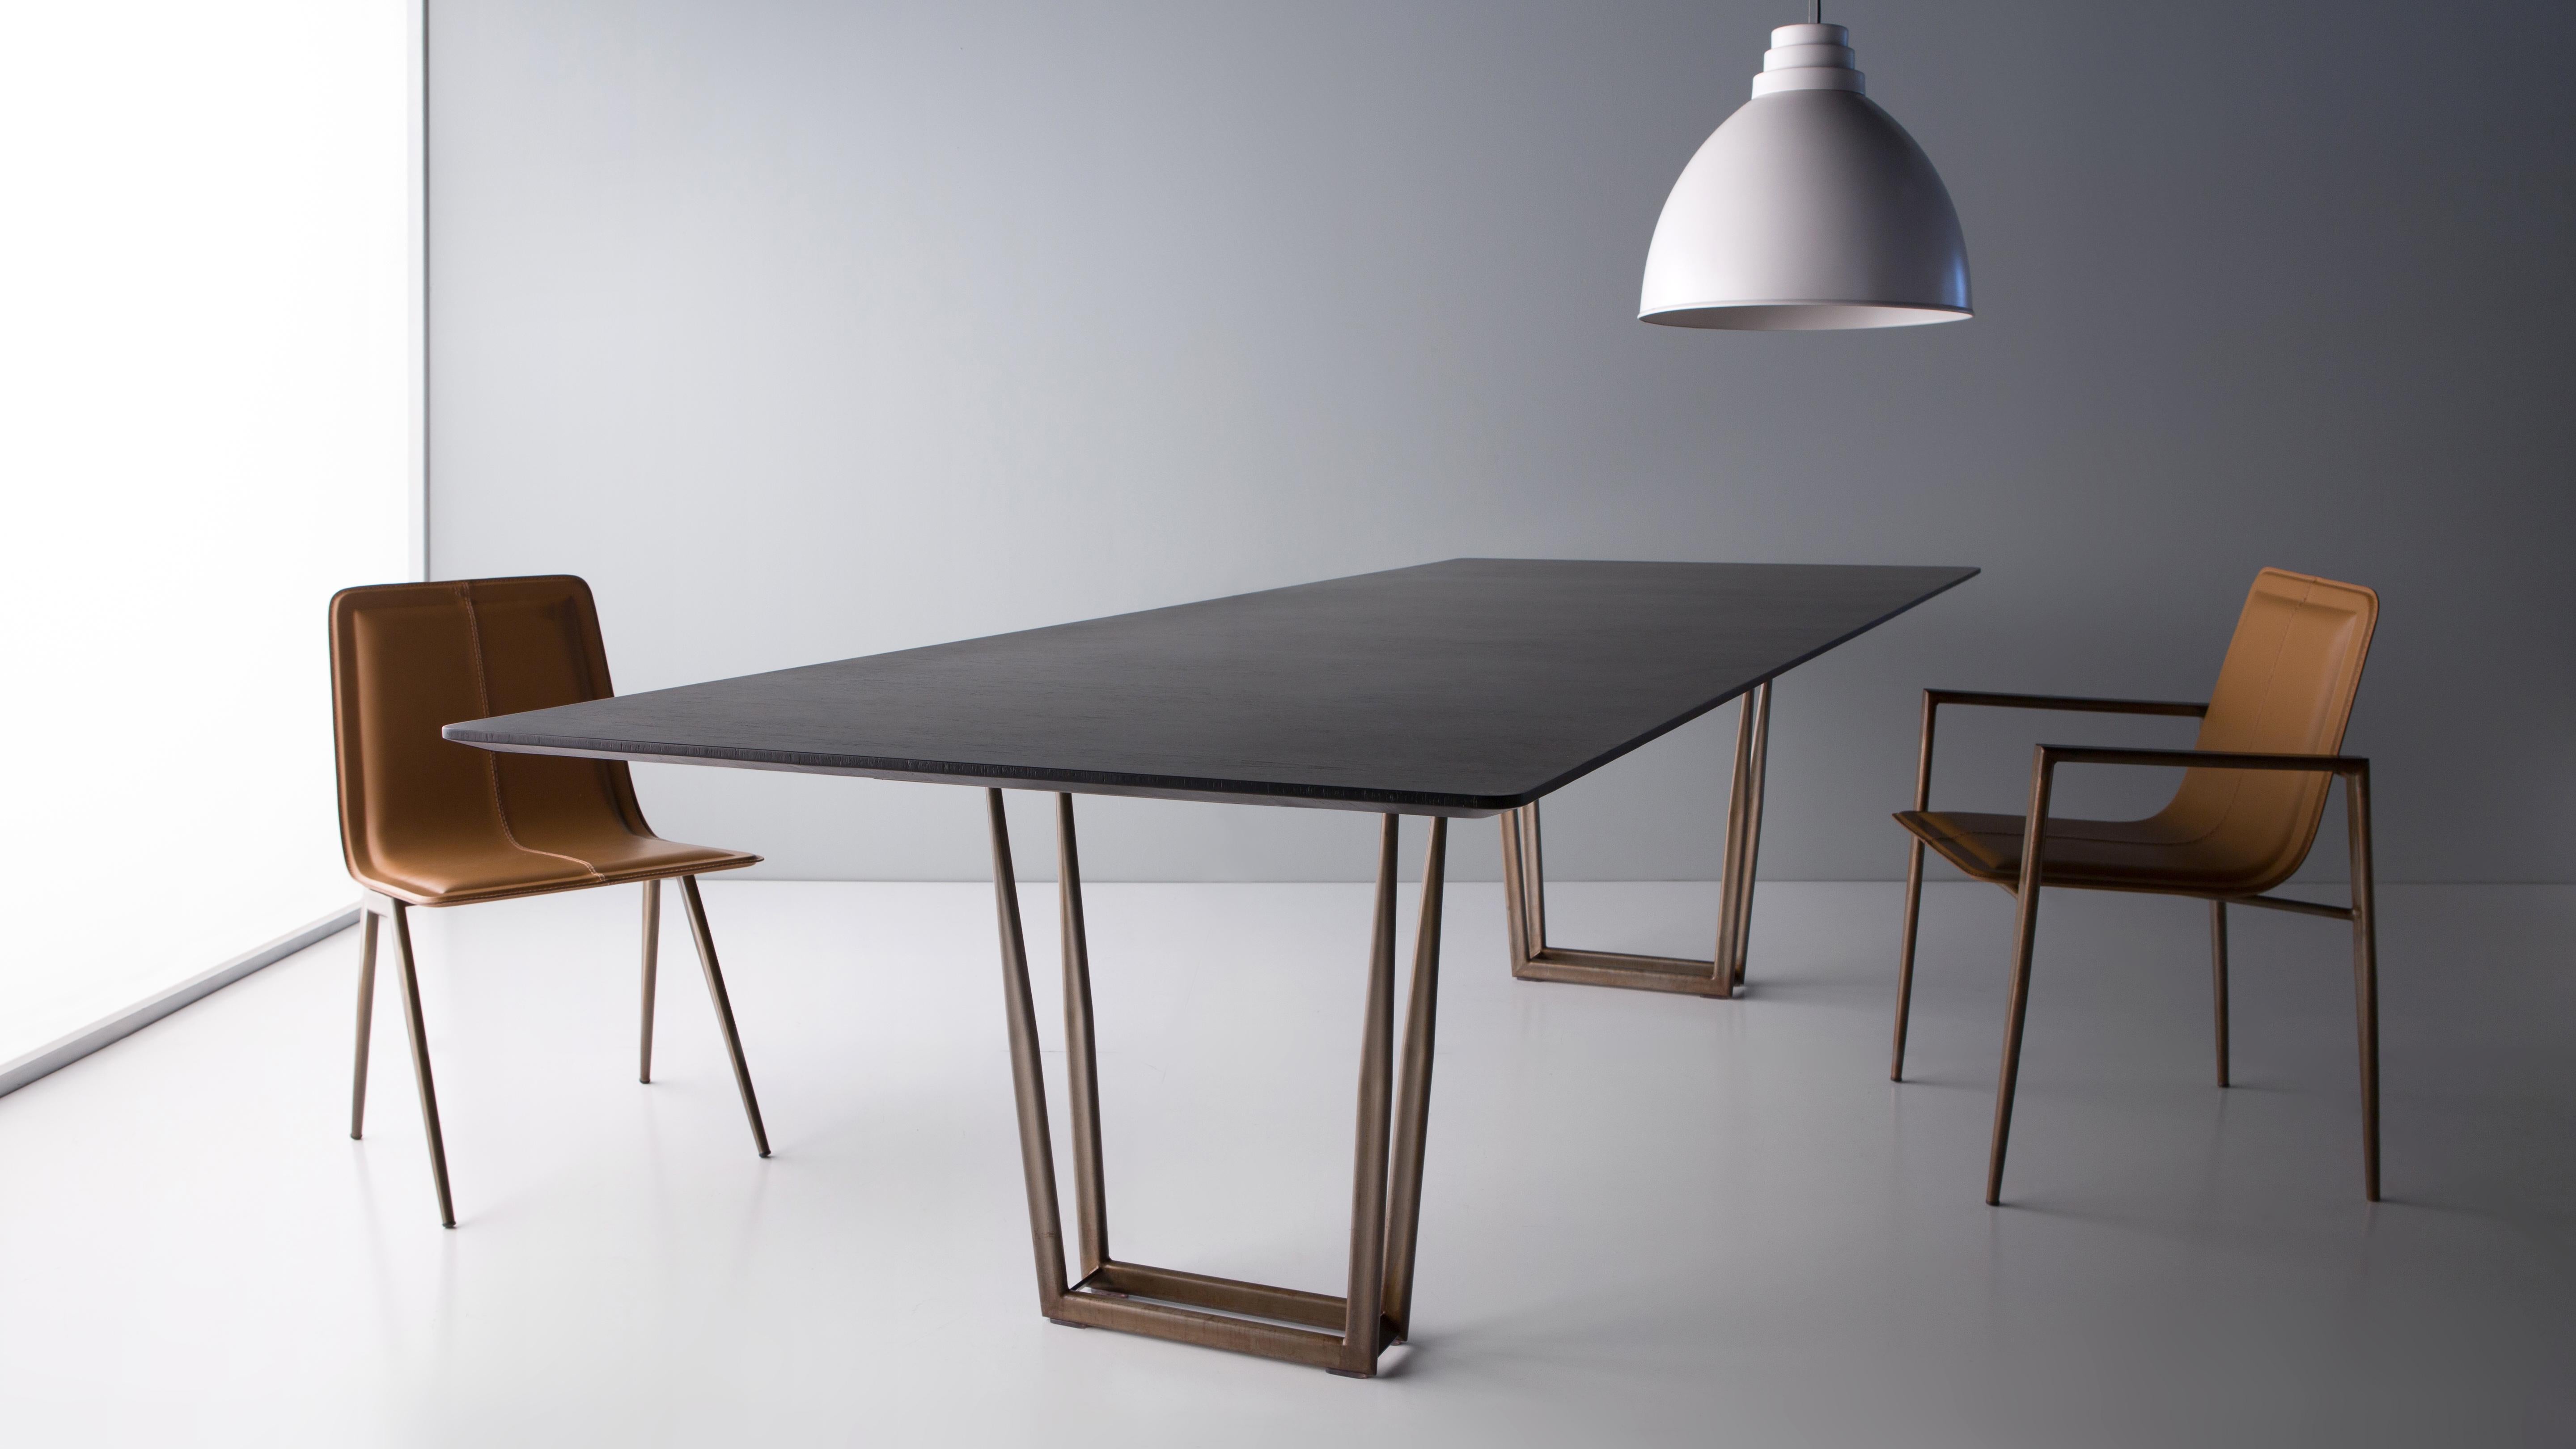 Slim Dining Table by Doimo Brasil
Dimensions: W 220 x D 110 x H 75 cm 
Materials: Base: Aged Steel, Top: Veneer or lacquer. 

Also available in other dimensions. Please contact us.

With the intention of providing good taste and personality, Doimo